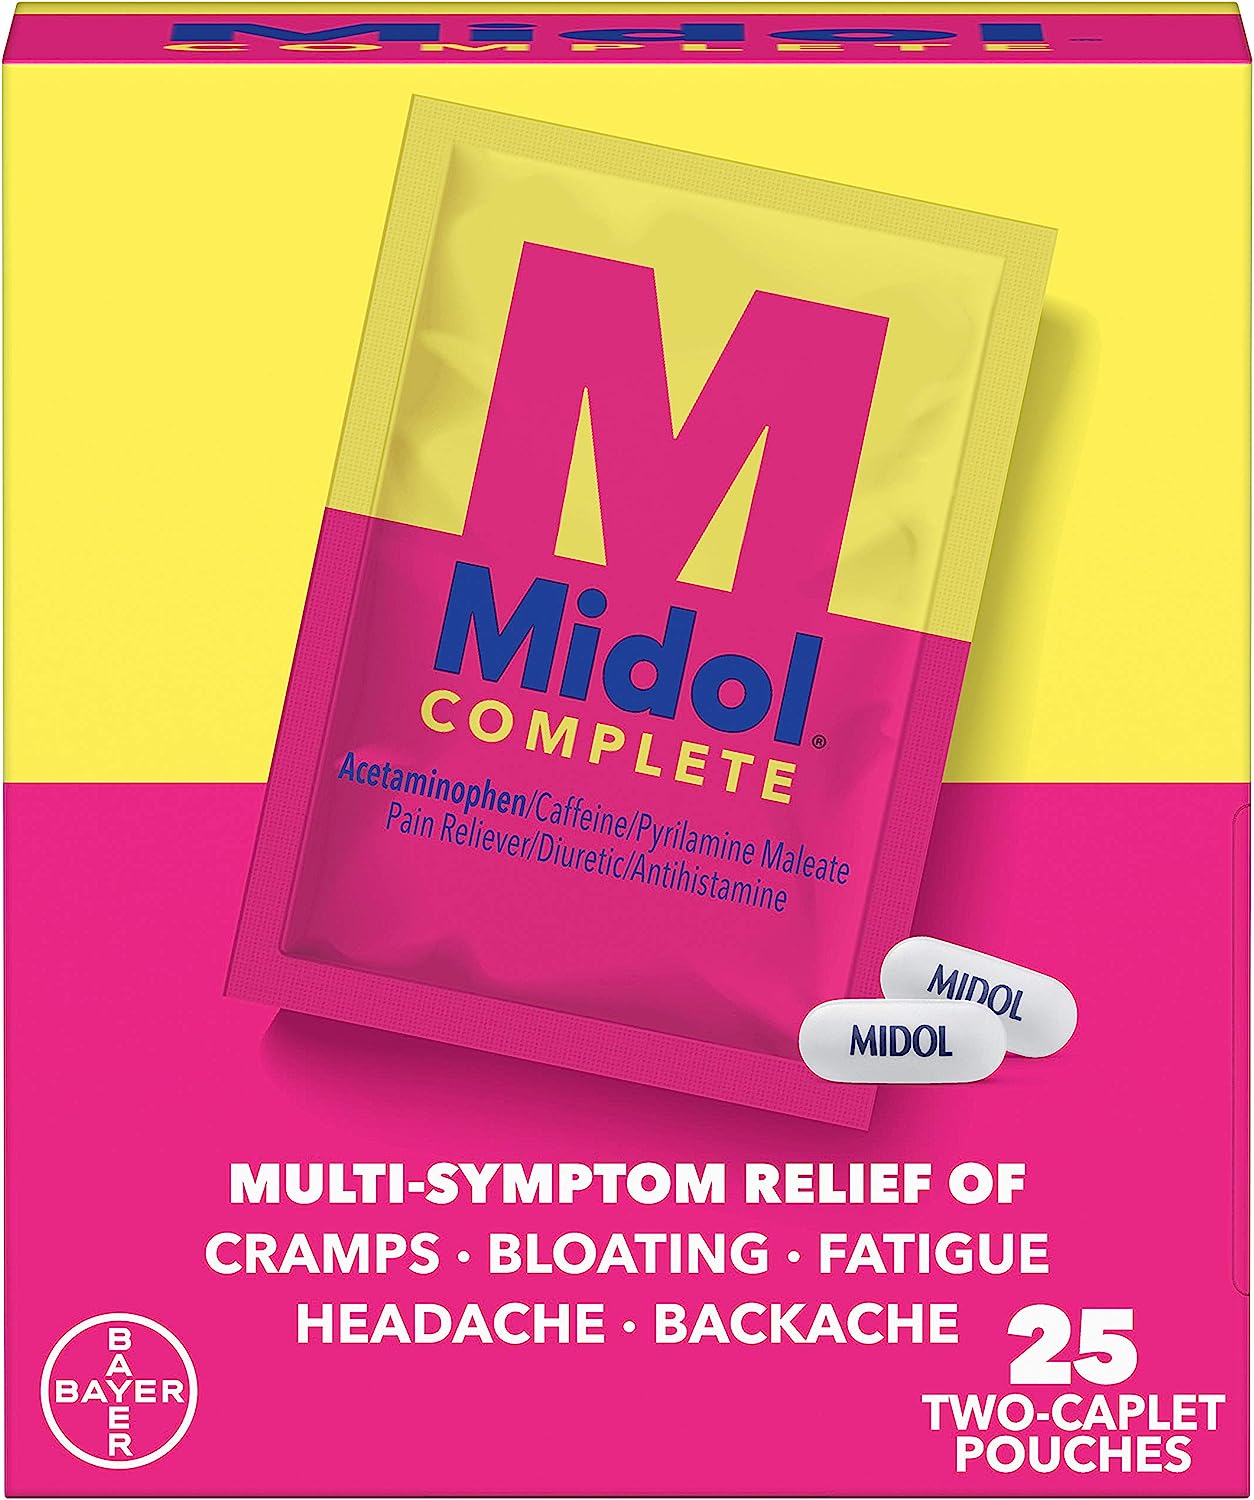 Midol Complete Caplets with Acetaminophen for Menstrual Symptom Relief - 50 Count (25 Pouches of 2), On The Go Period Cramp Relief and Menstrual Pain Relief